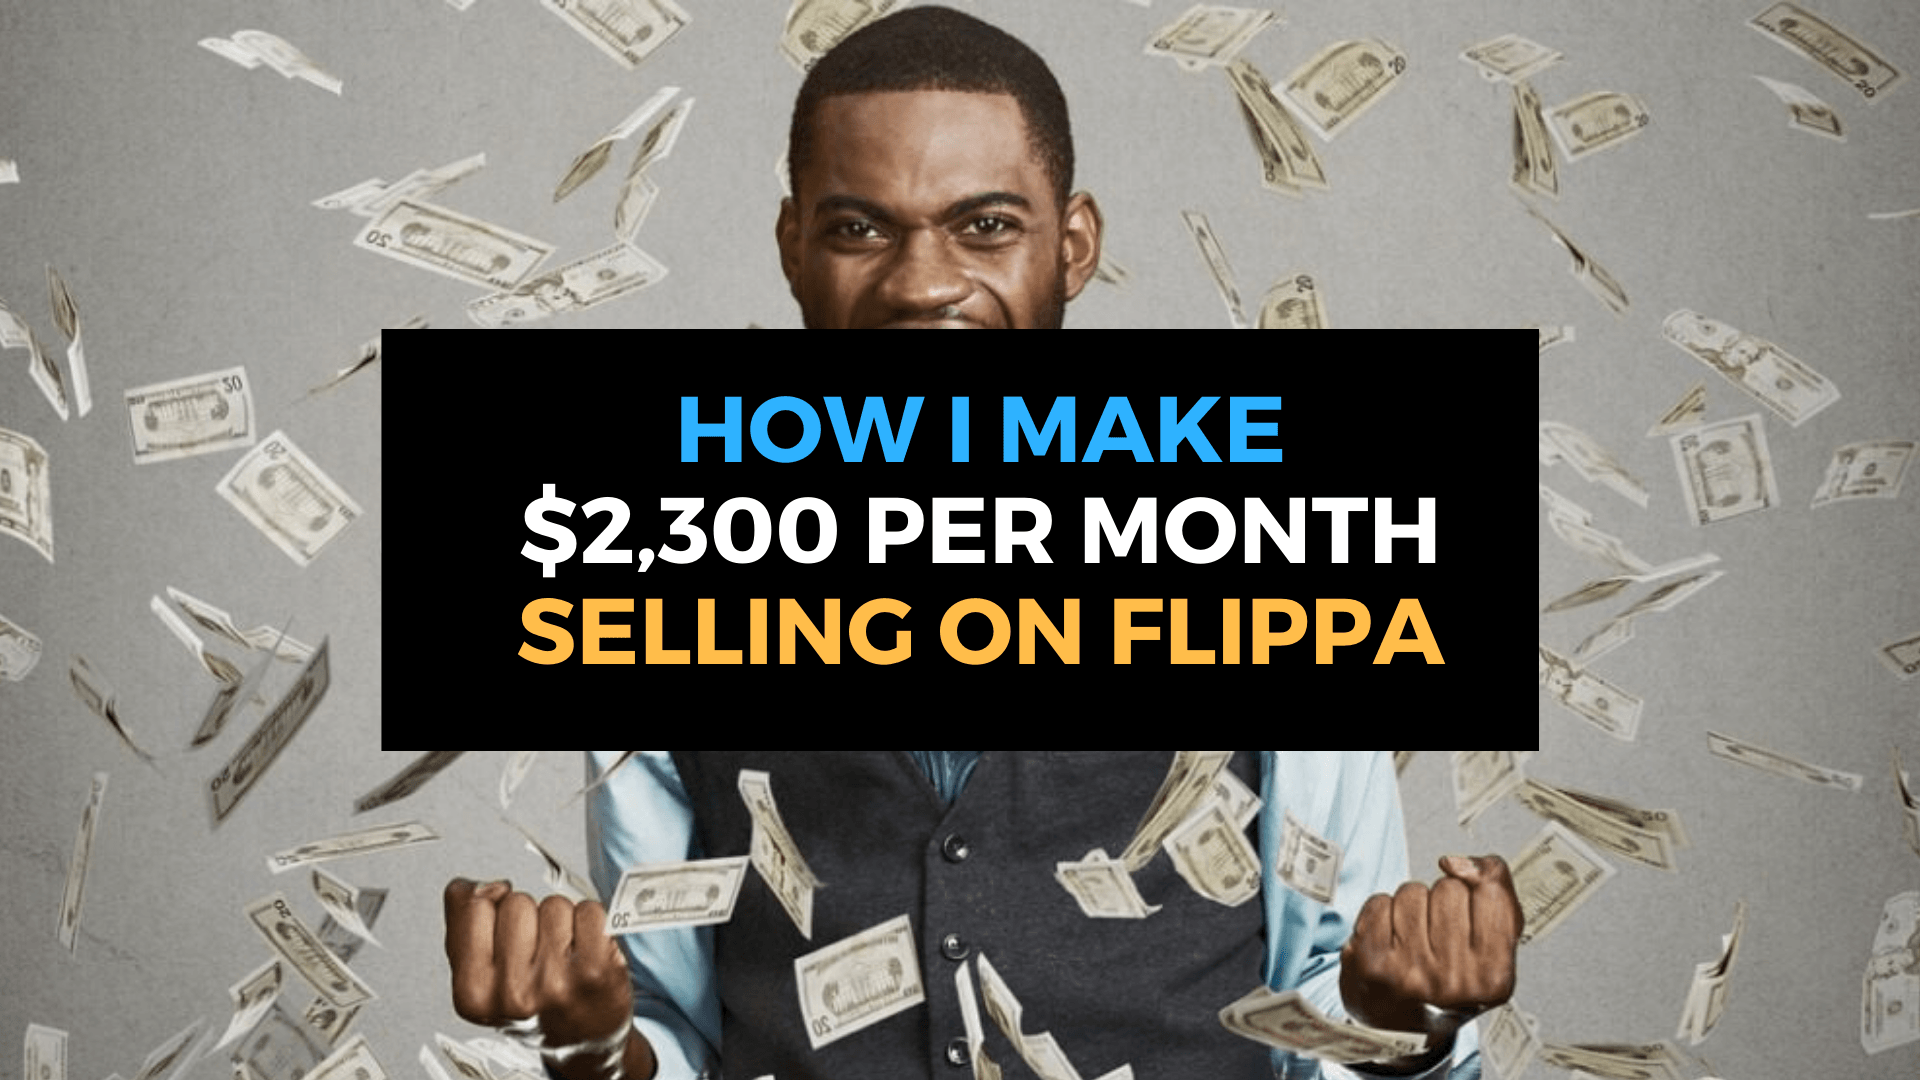 5 STEPS TO EARN PASSIVE INCOME SELLING WEBSITES ON FLIPPA